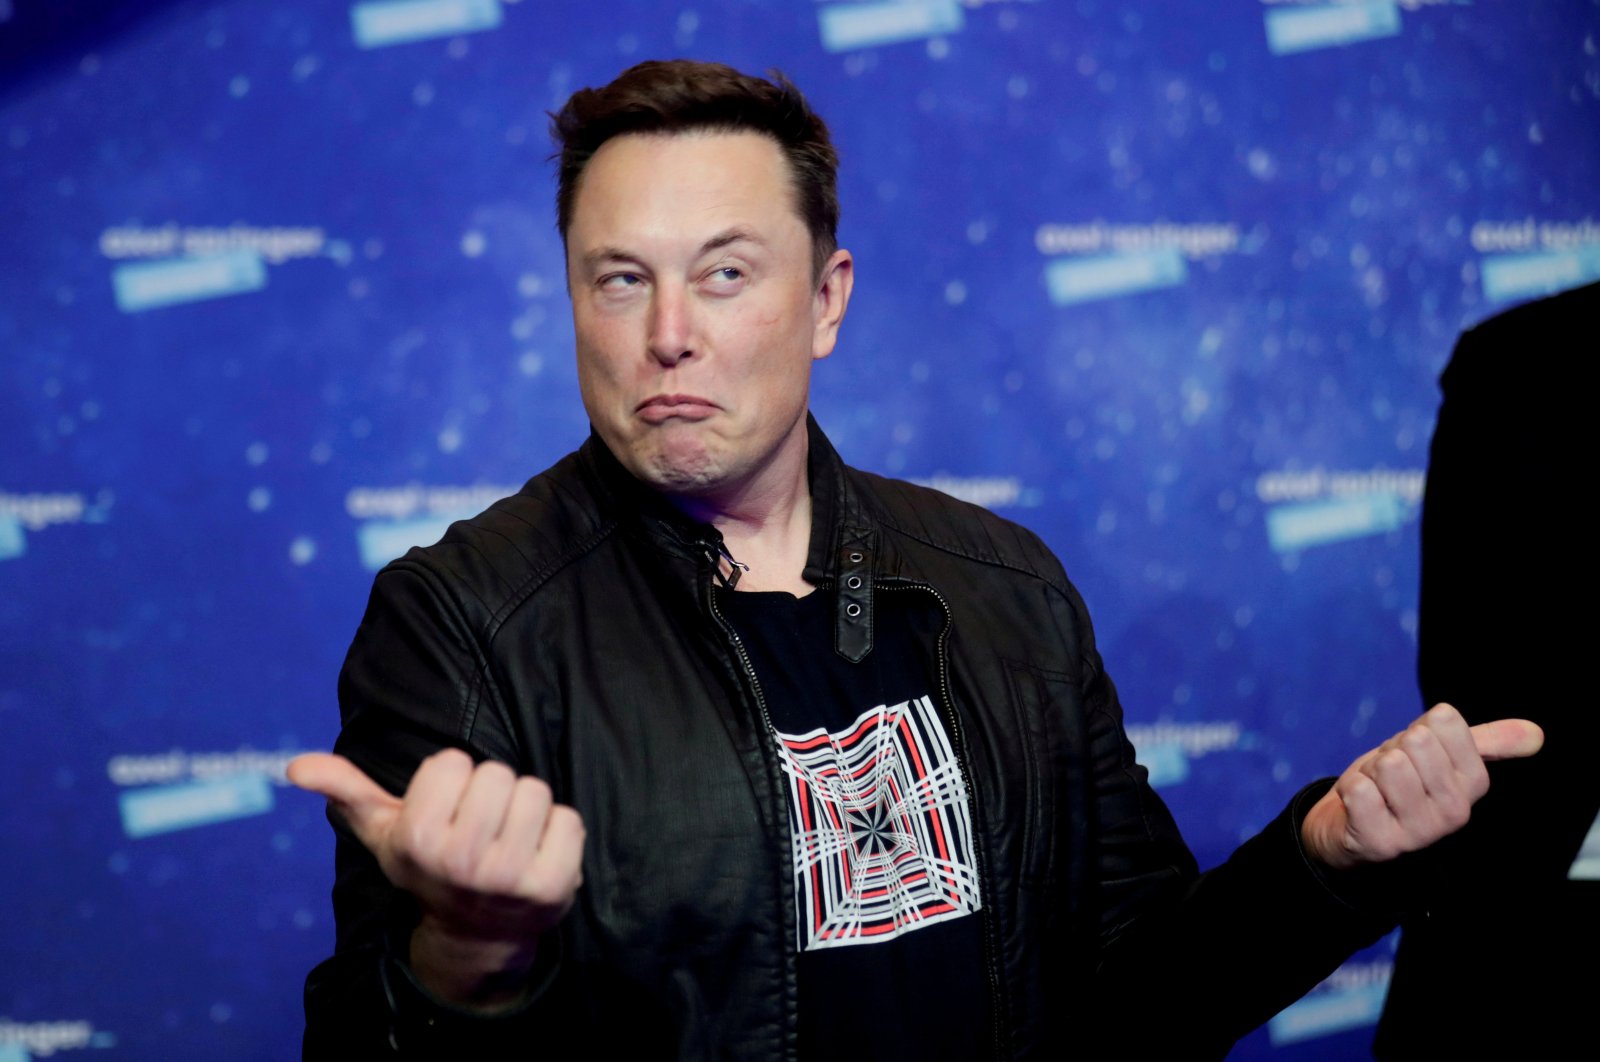 SpaceX owner and Tesla CEO Elon Musk grimaces after arriving on the red carpet for the Axel Springer award, in Berlin, Germany, Dec. 1, 2020. (REUTERS Photo)